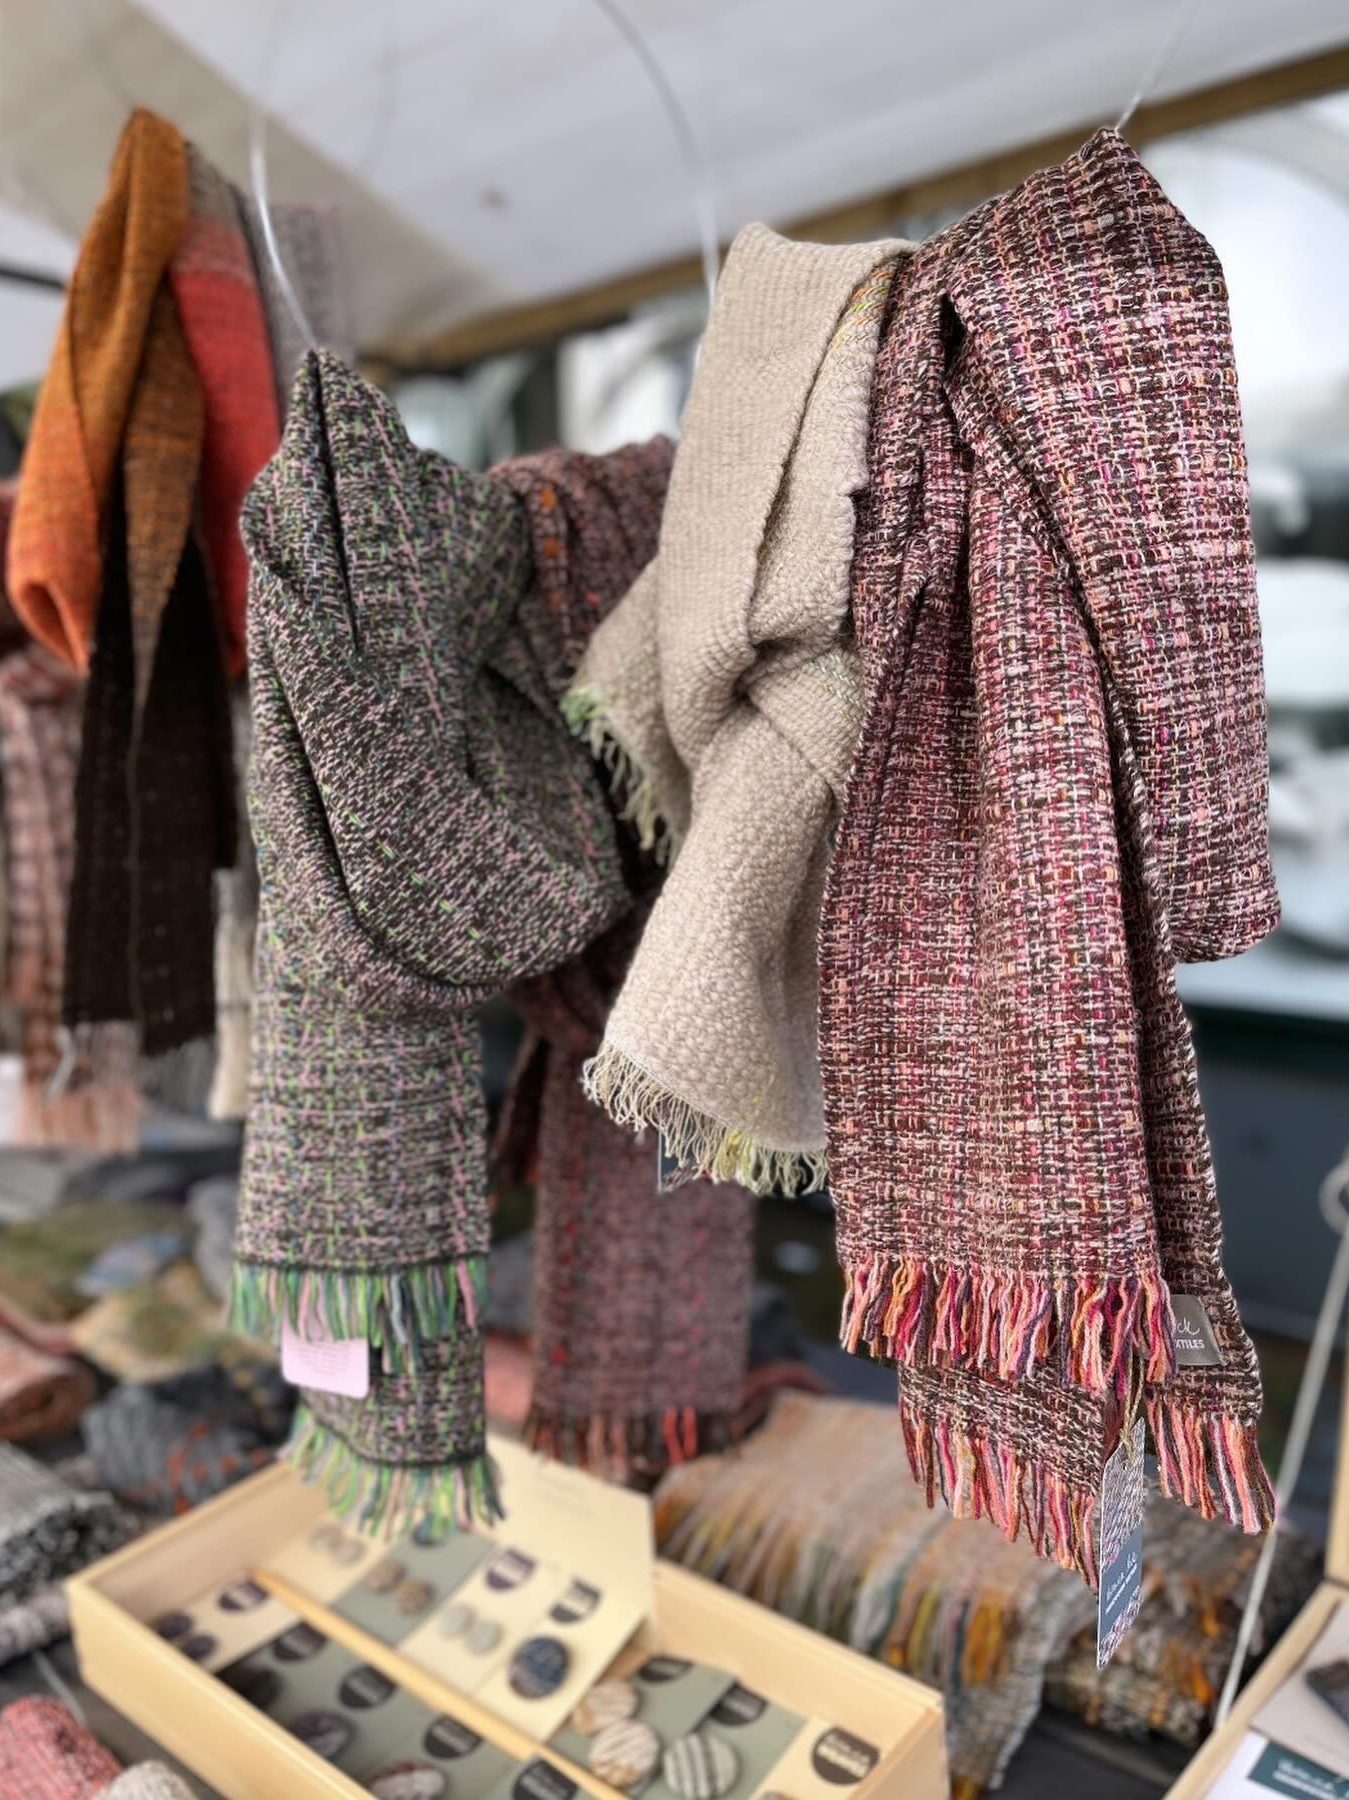 Scarves on display at a market